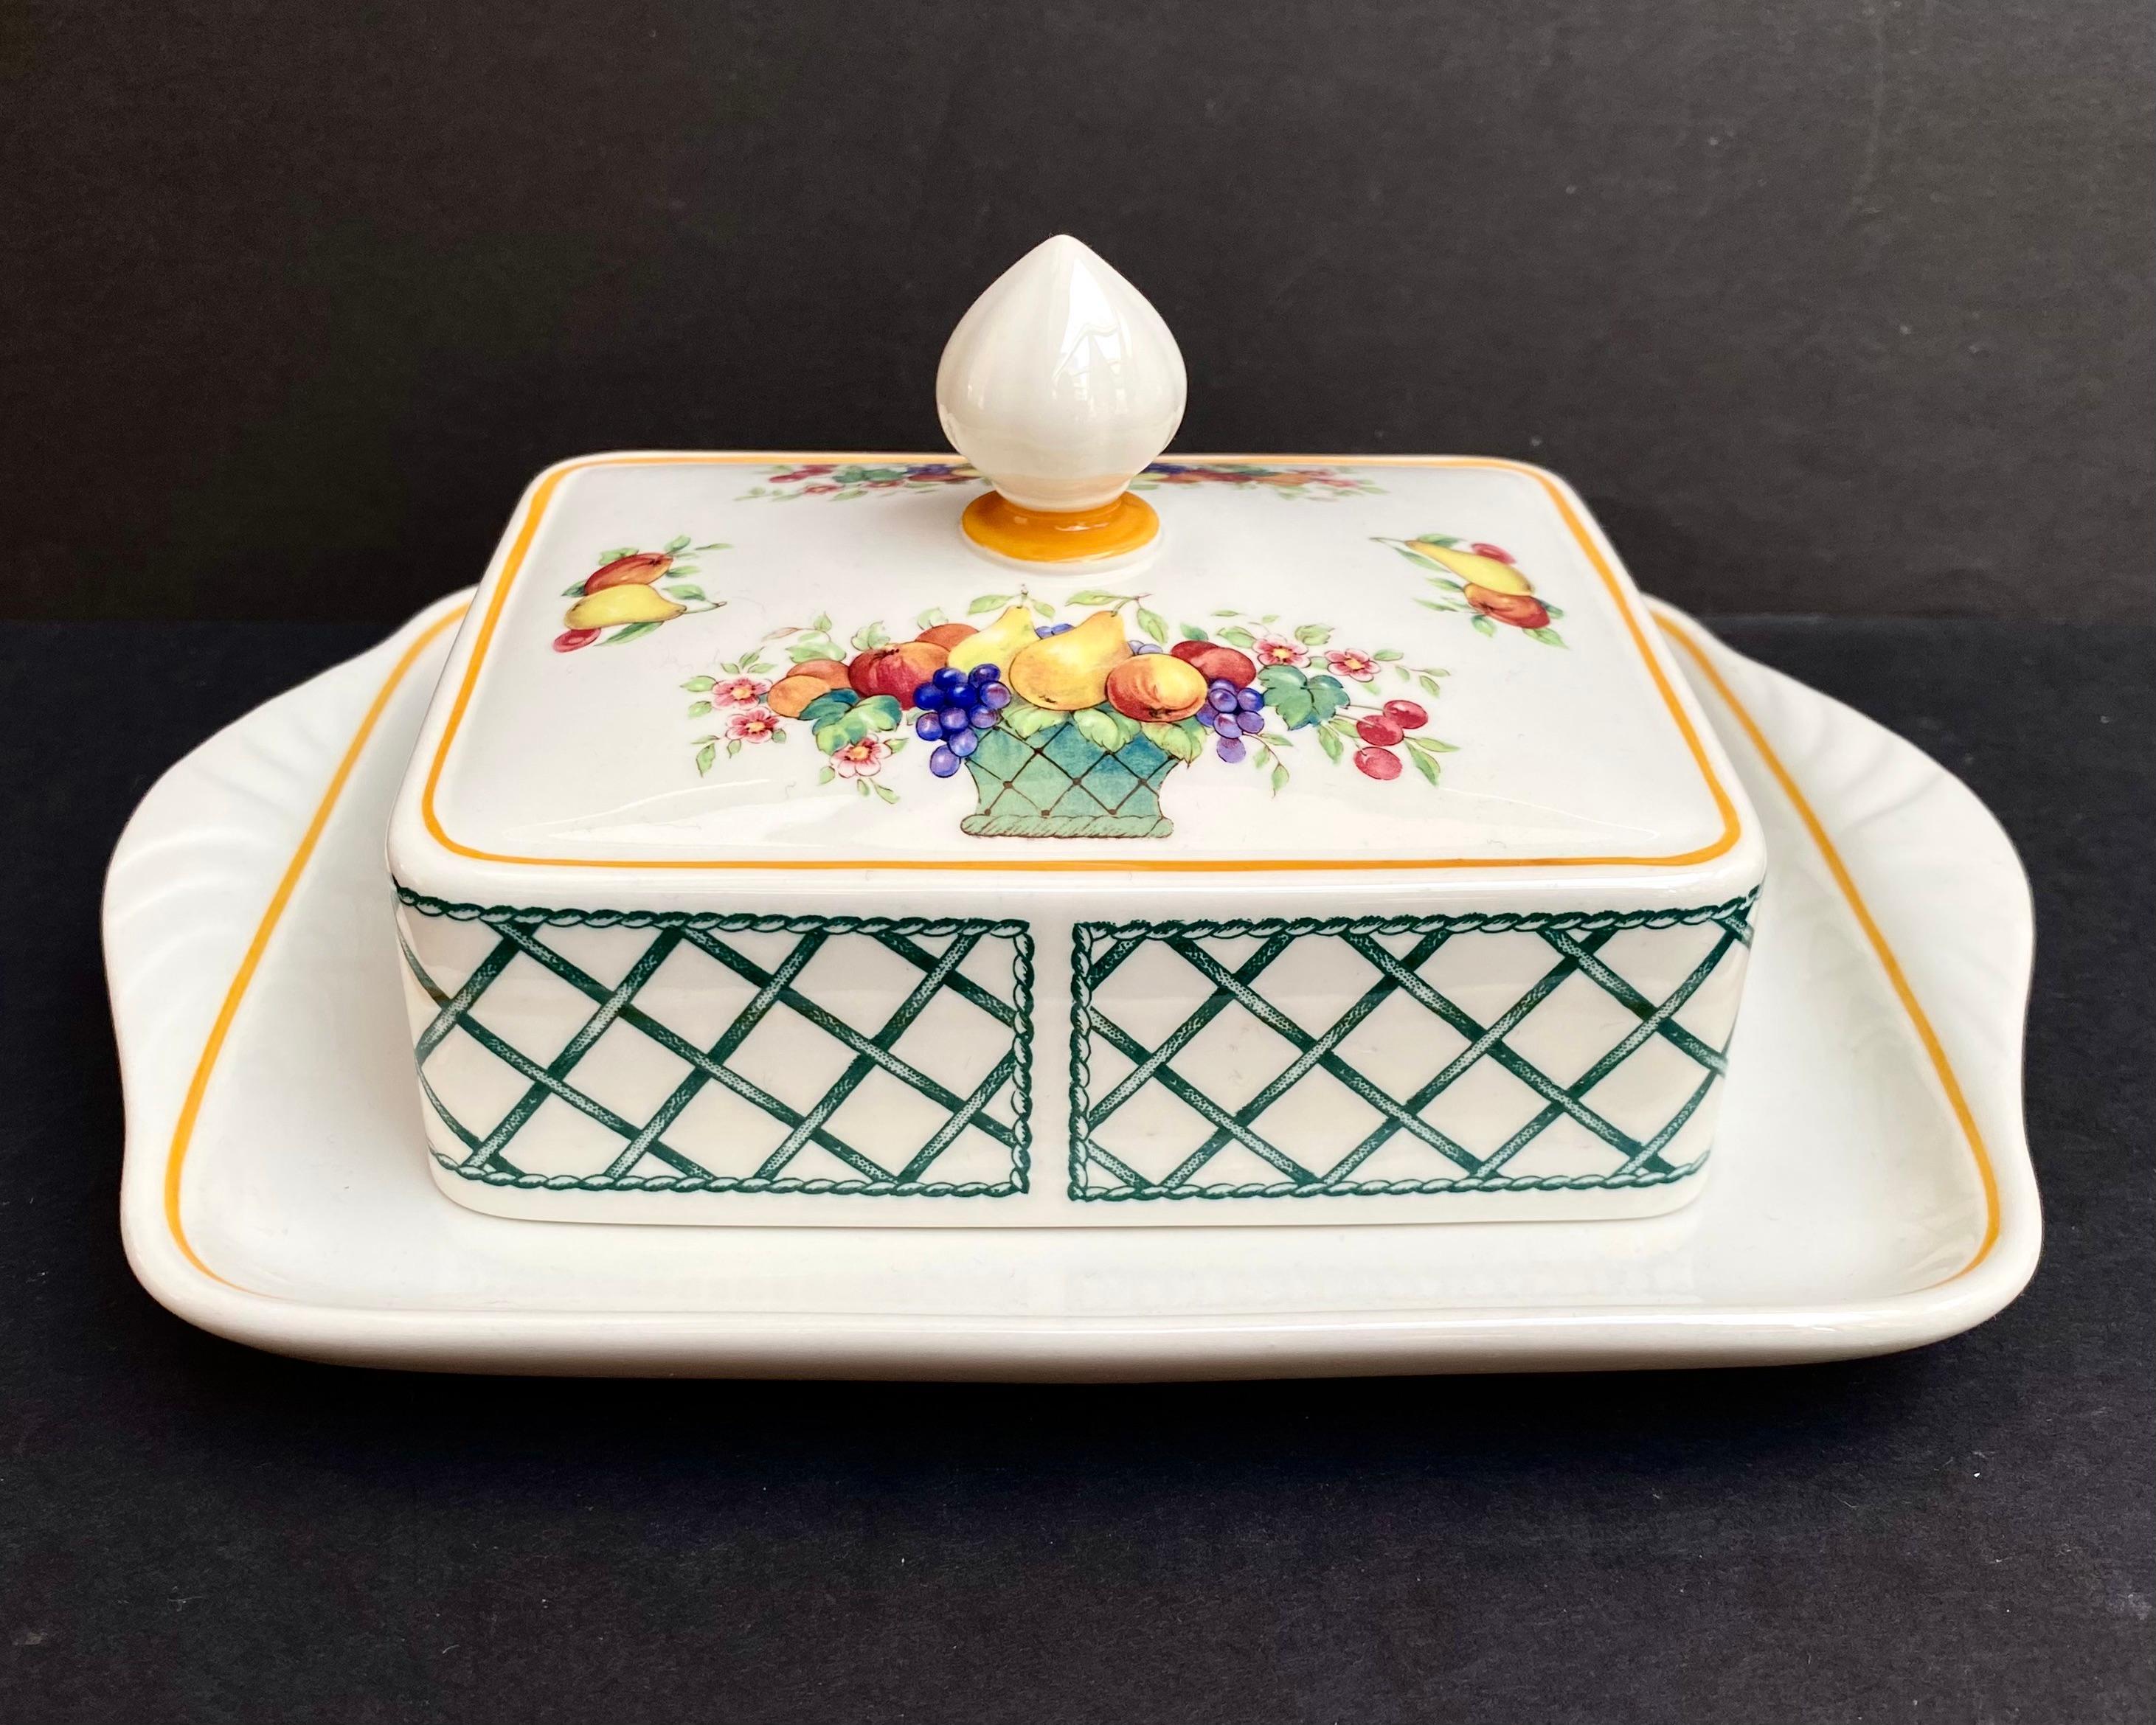 Basket by Villeroy & Boch creates the right atmosphere. The series with French esprit is a design by Helene von Boch in 1973. Juicy-sweet summer fruits spill out of a basket framed by a green lattice border.

This pattern has been discontinued but